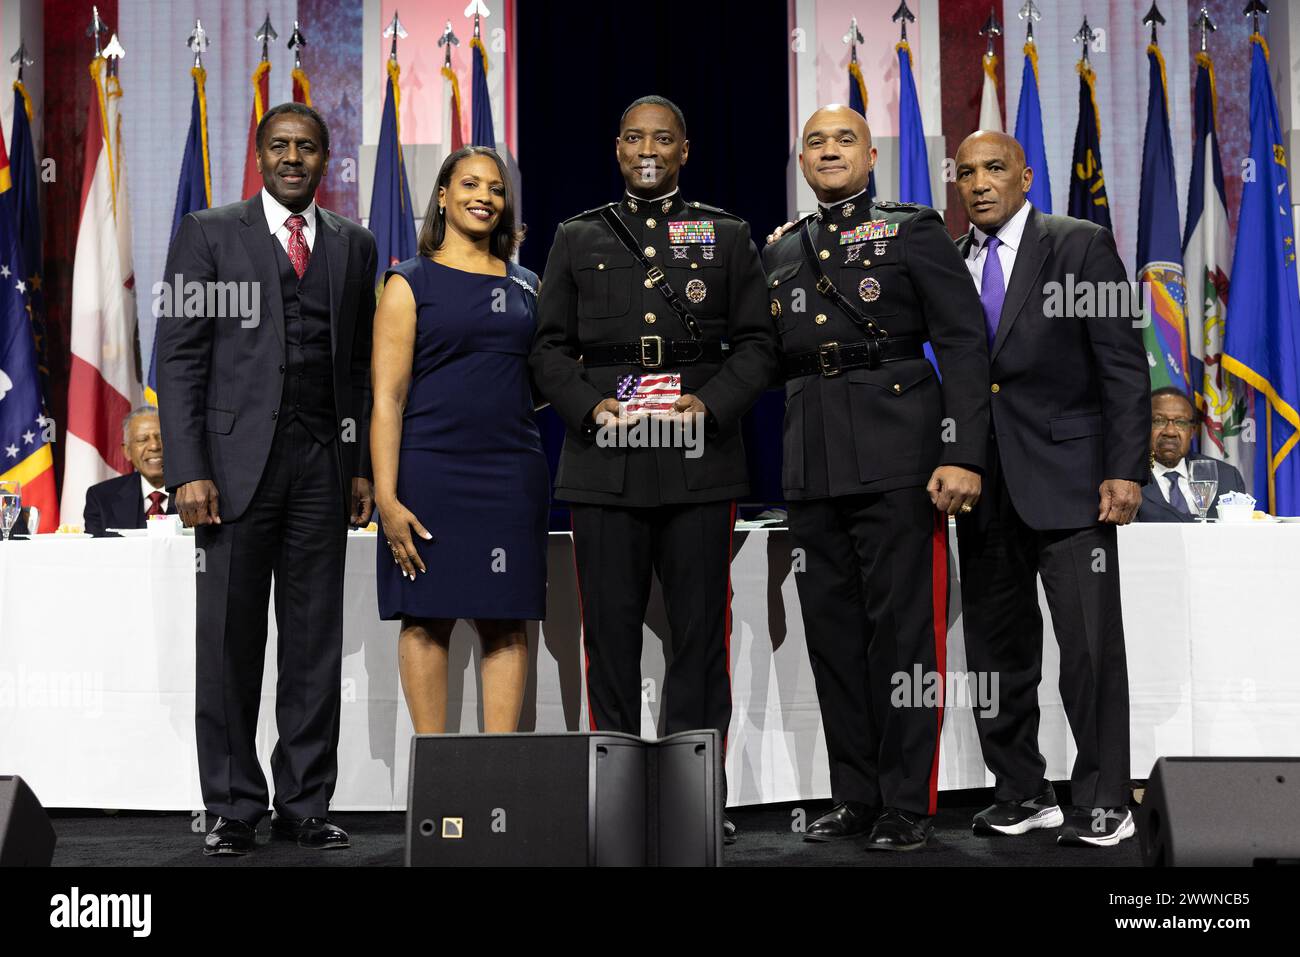 U.S. Marine Corps Lt. Gen. Brian W. Cavanaugh, Commander, Fleet Marine Force, Atlantic, Marine Forces Command, Commanding General, Marine Forces Northern Command, center right, stands with Brig. Gen. Ahmed Williamson, center, recipient of 2024 Stars and Stripes Honors award, at the 38th annual Becoming Everything You Are (BEYA) conference, Baltimore, Feb. 16, 2024. During the conference, Cavanaugh participated in mentoring sessions for STEM (science, technology, math, engineering) students and represented the Marine Corps to present the 2024 BEYA Stars and Stripes Honors award for outstanding Stock Photo